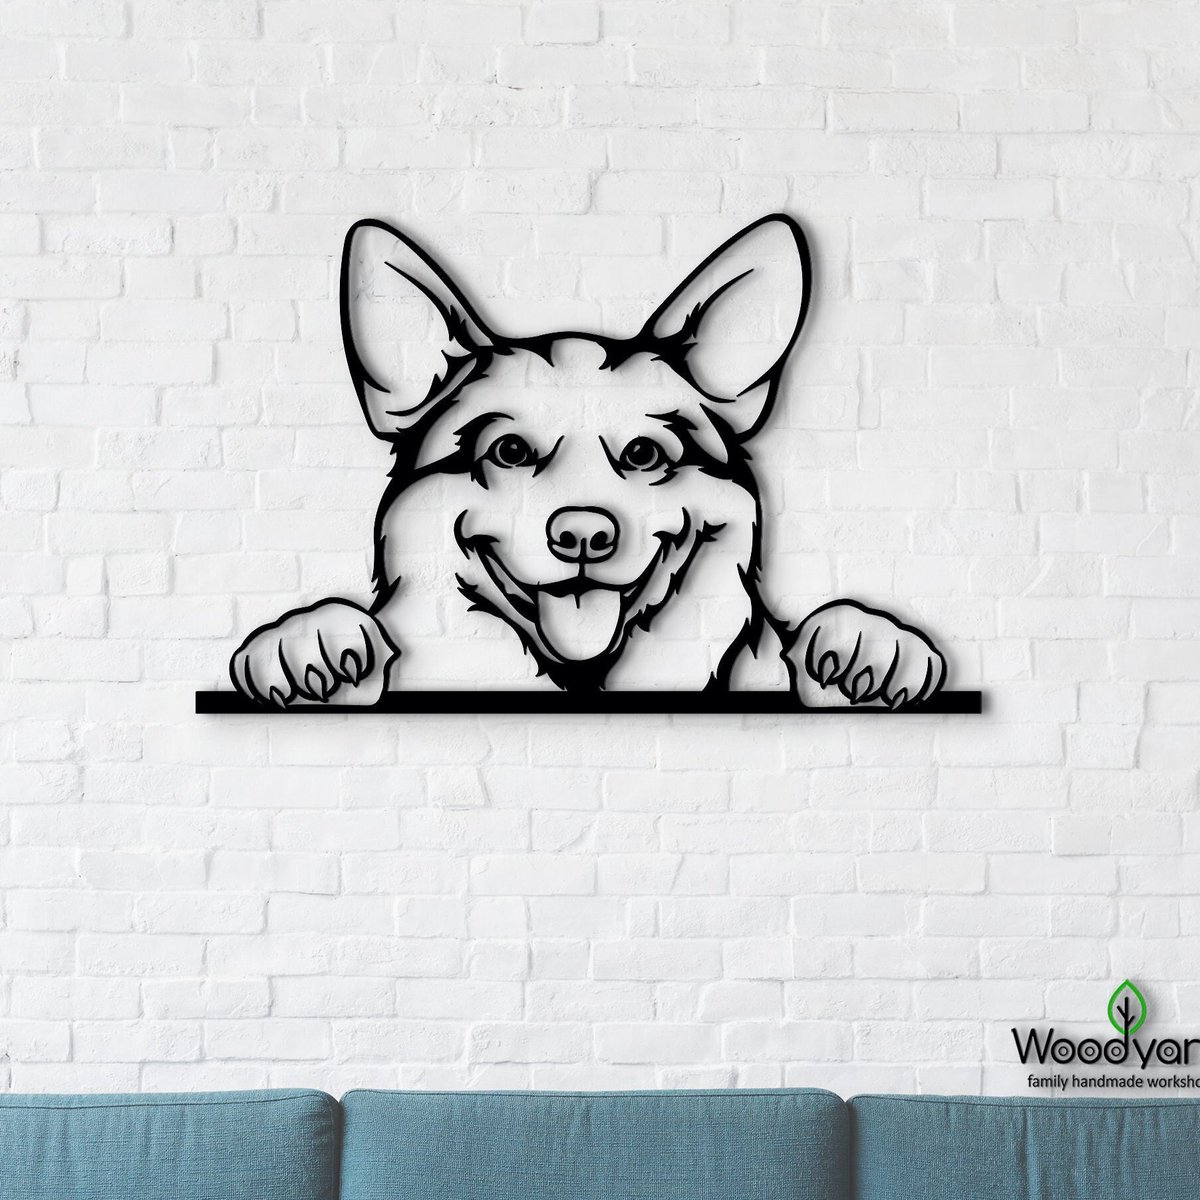 Excited to share the latest addition to my #etsy shop: Pembroke Welsh Corgi dog decor for wall. Unique gift for dog owners 
etsy.me/40OFNR1
#dogmemorial #dogsympathygift #kidsroomwallart #dogmomgift #pembrokewelshcorgi #Corgi #CorgiCrew #CorgiLover #corgilovers